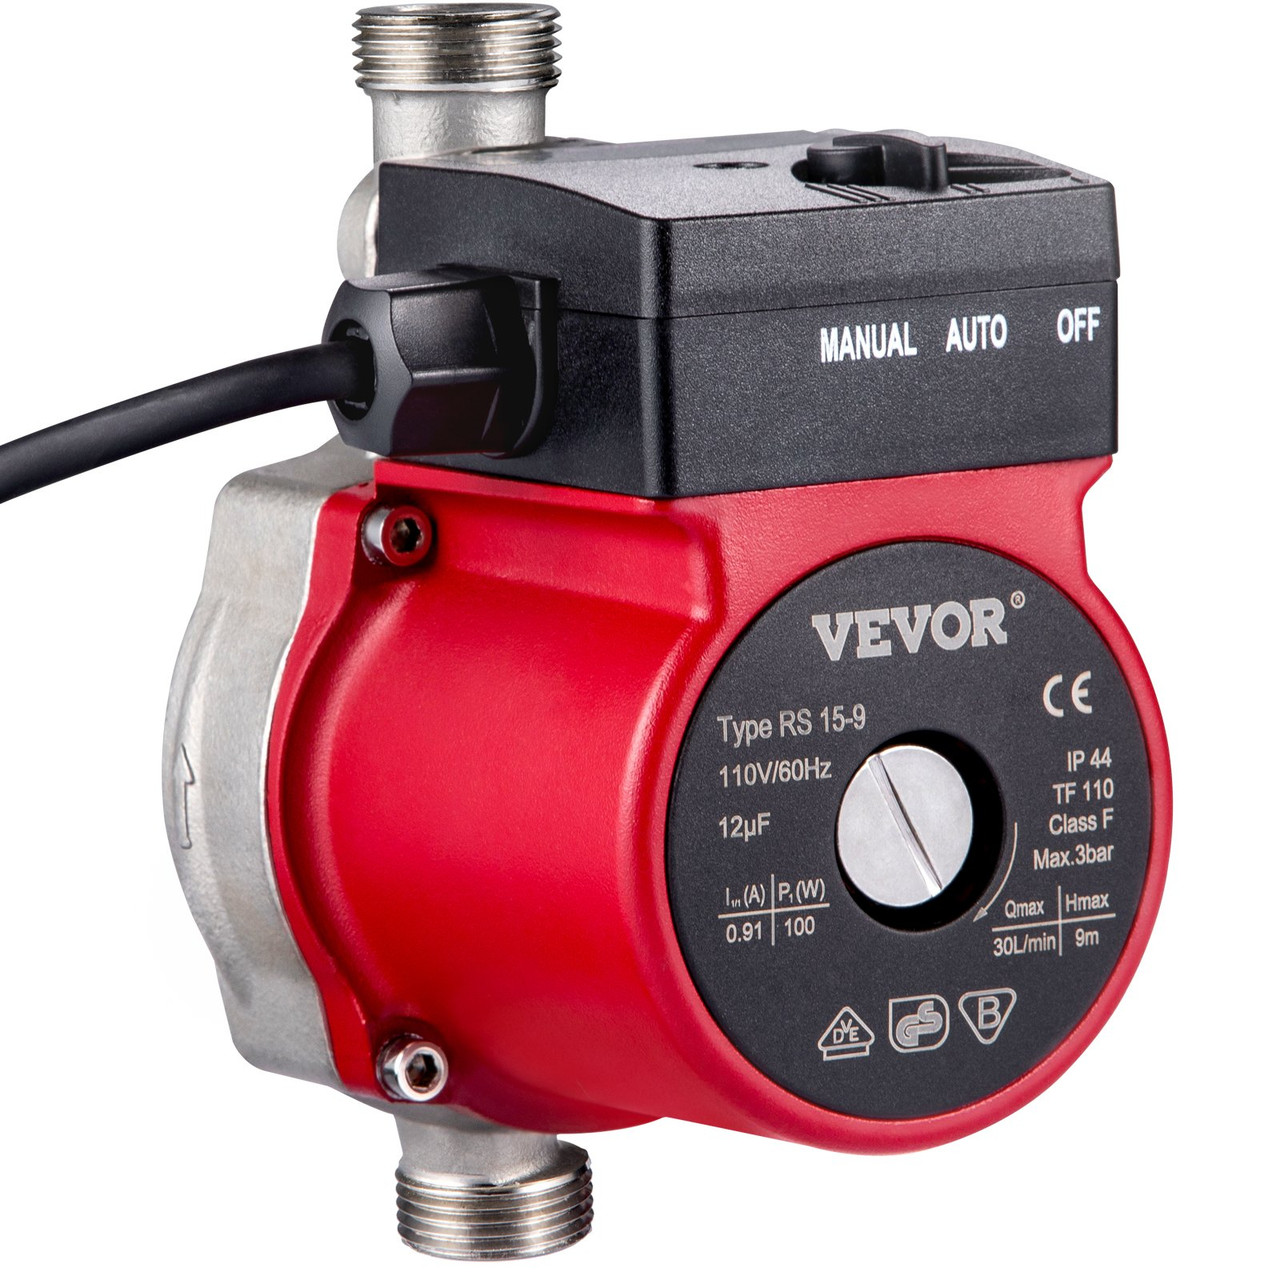 VEVOR Hot Water Recirculating Pump, 120W 110V Water Circulator Pump, Automatic Start Circulating Pump NPT 3/4" with Brass Fittings, Stainless Steel Head, 2 Speed Control for Electric Water Heater Sys